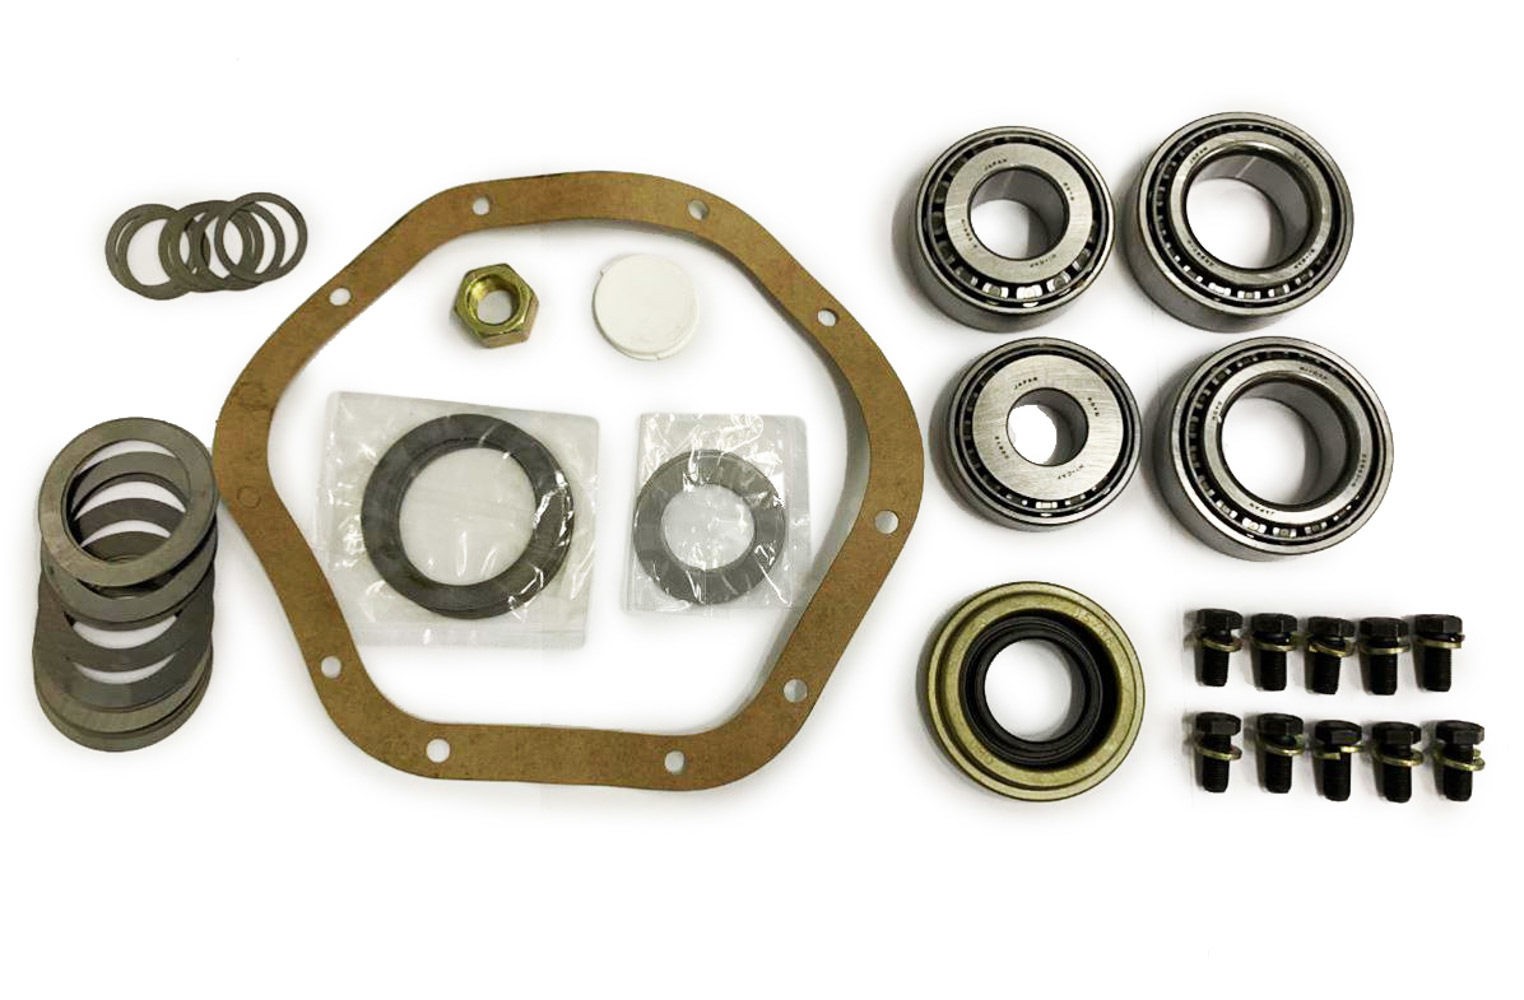 Ratech 322KT - Differential Installation Kit, Complete, Timken Bearings / Crush Sleeve / Gaskets / Hardware / Seals / Shims / Marking Compound, Dana 44, Kit